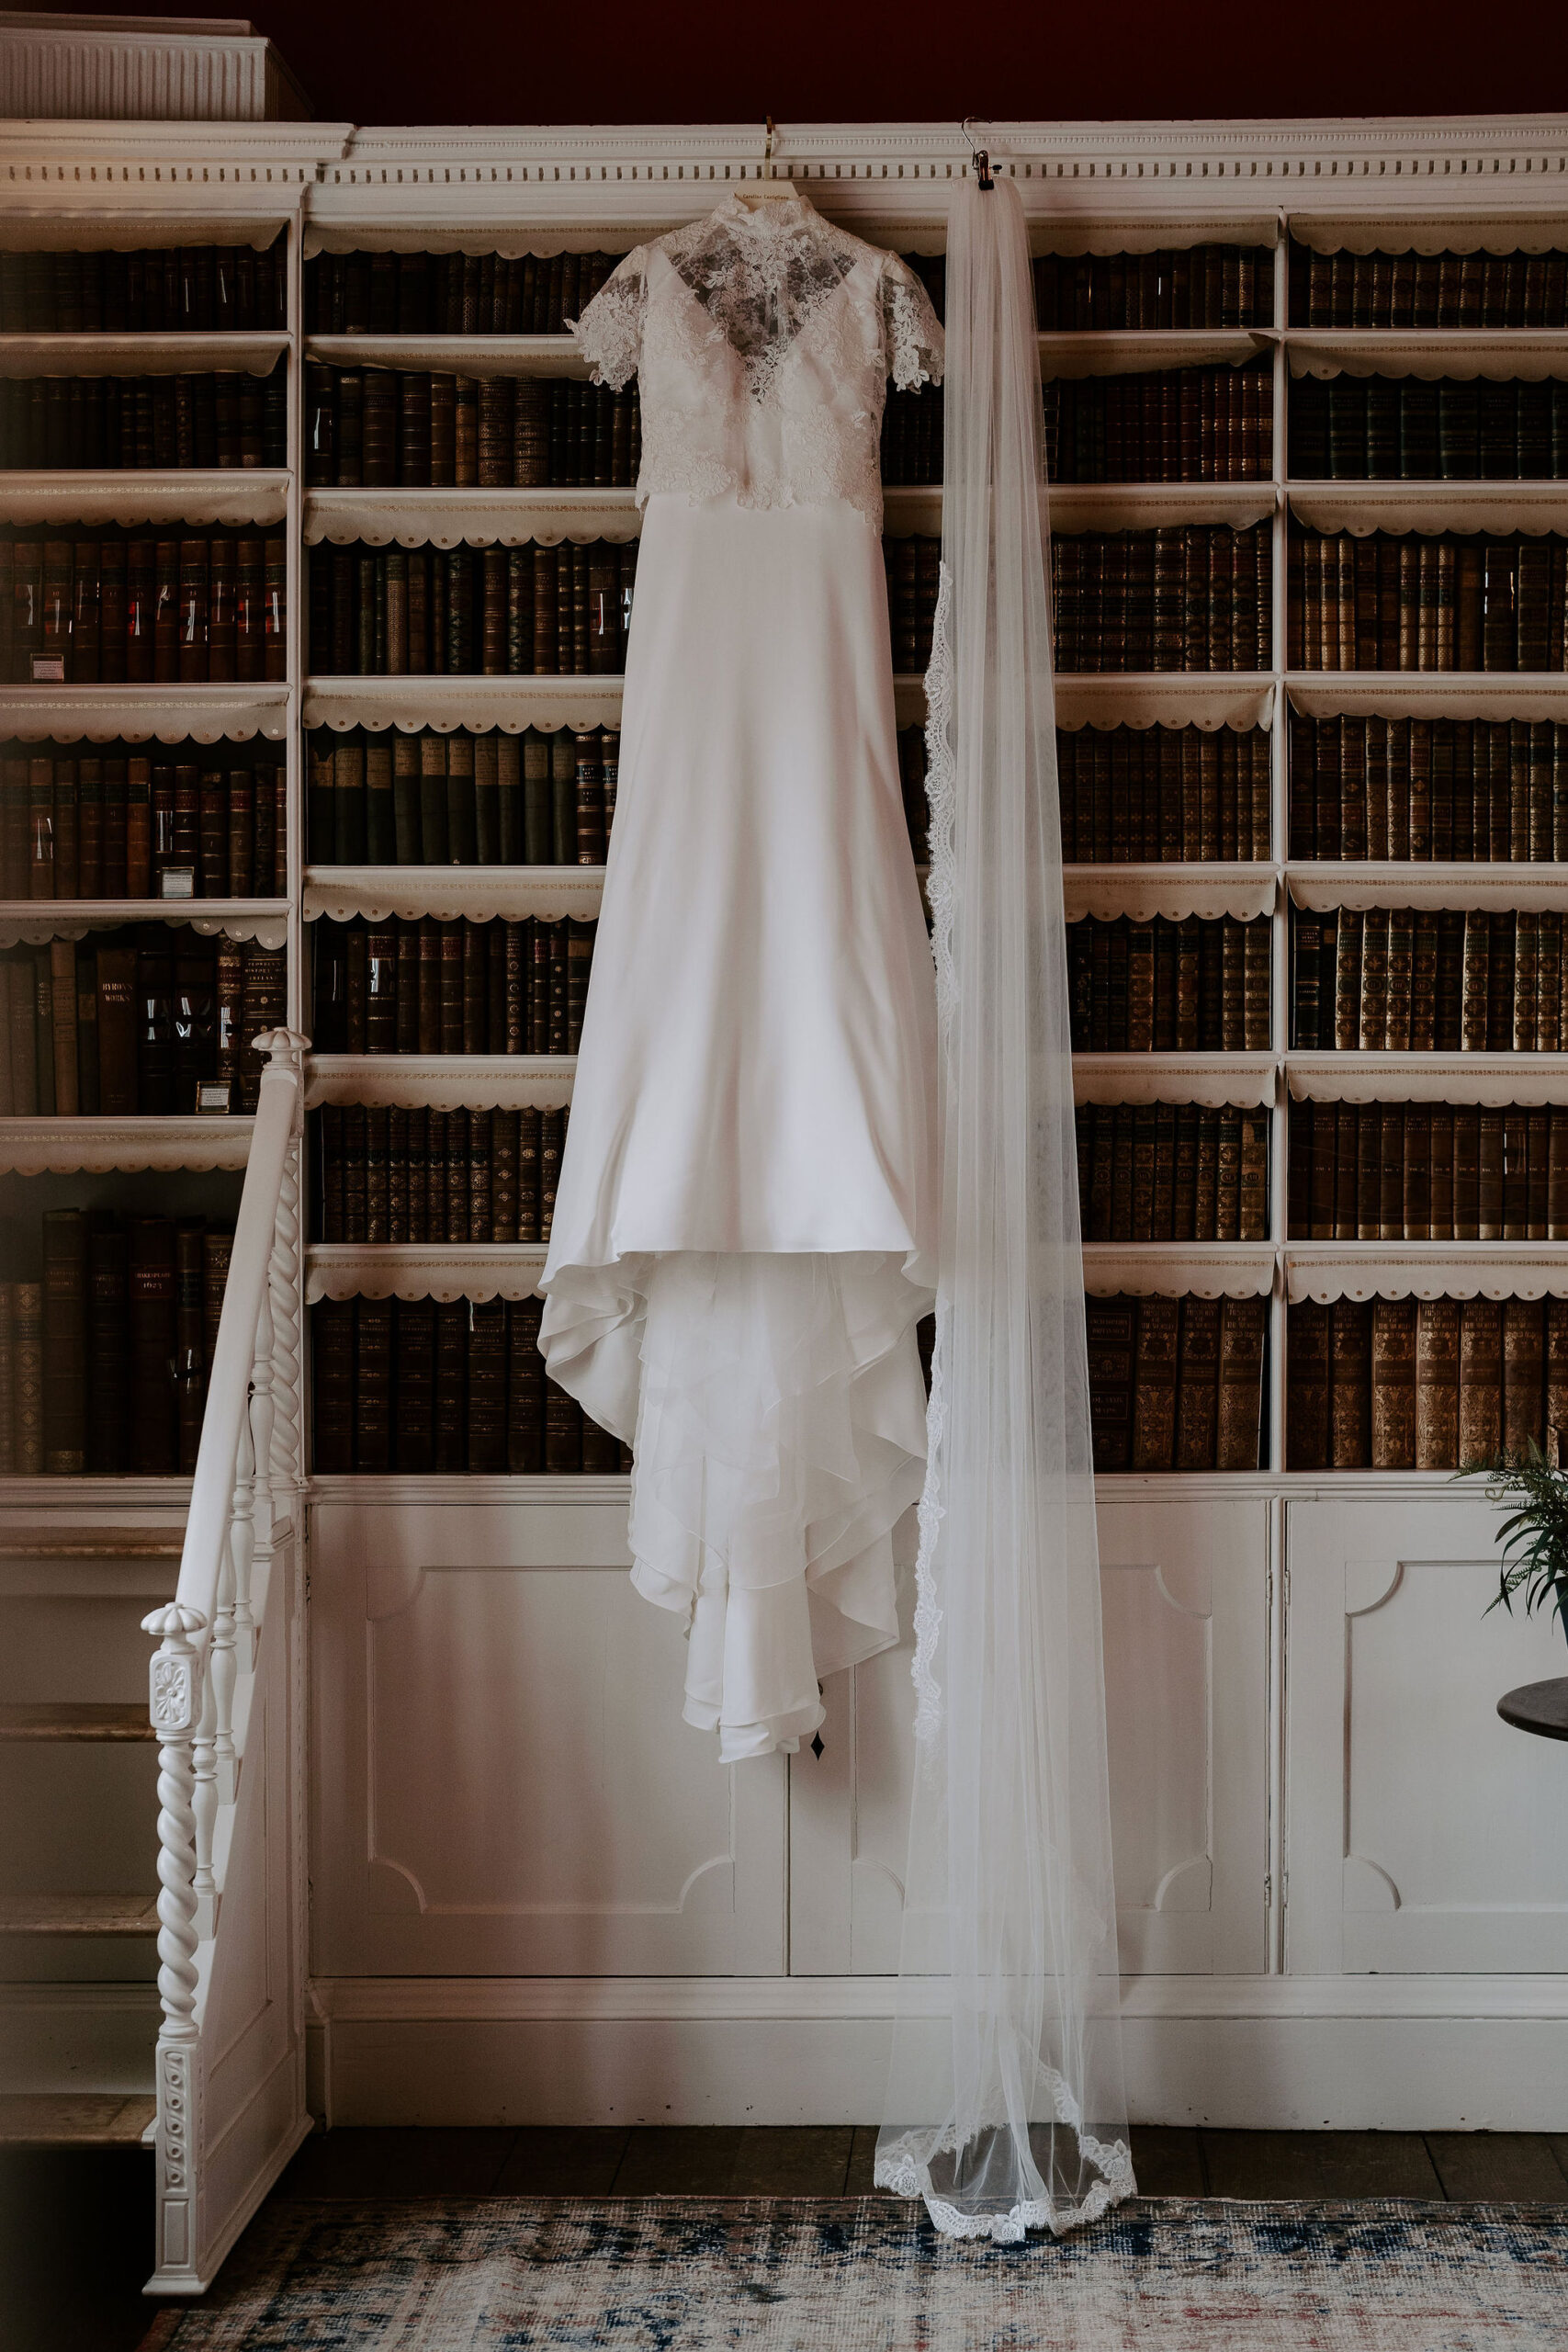 A white lace wedding gown hangs next to a long veil on a set of antique white bookshelves that have antique leather bound books upon them